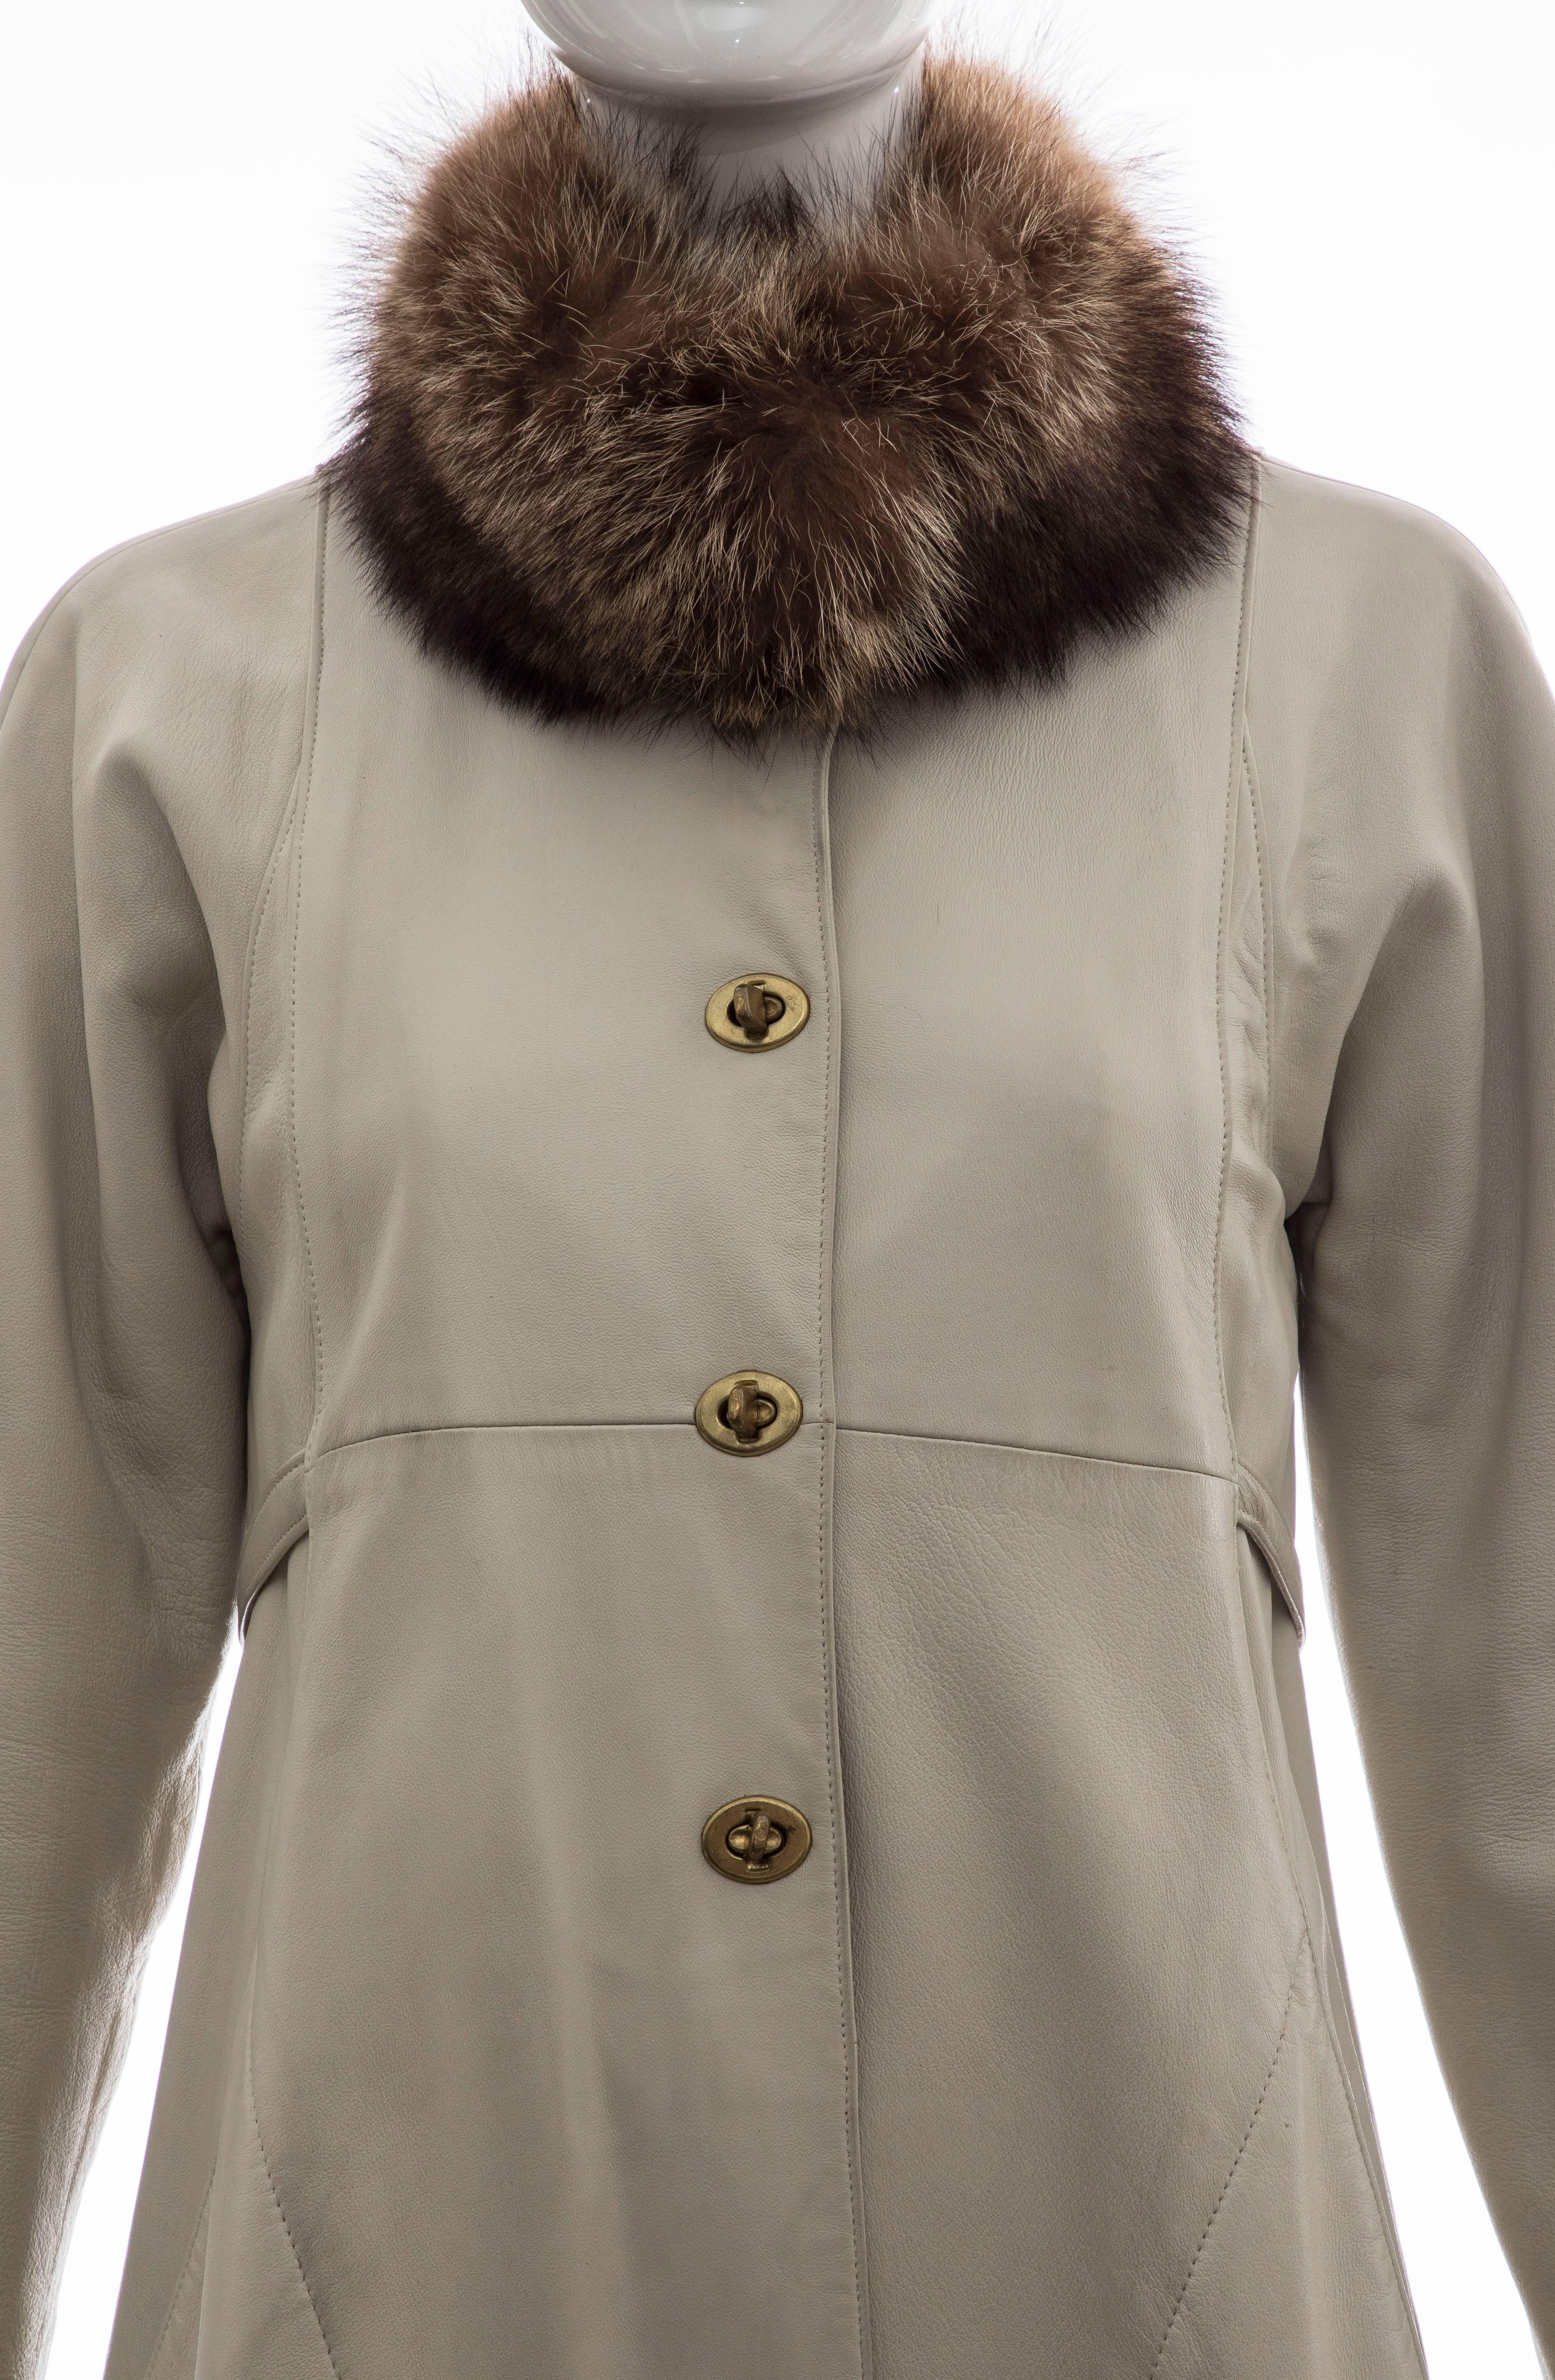 Women's Bonnie Cashin For Sills Leather Coat With Fur Trim, Circa 1960s For Sale